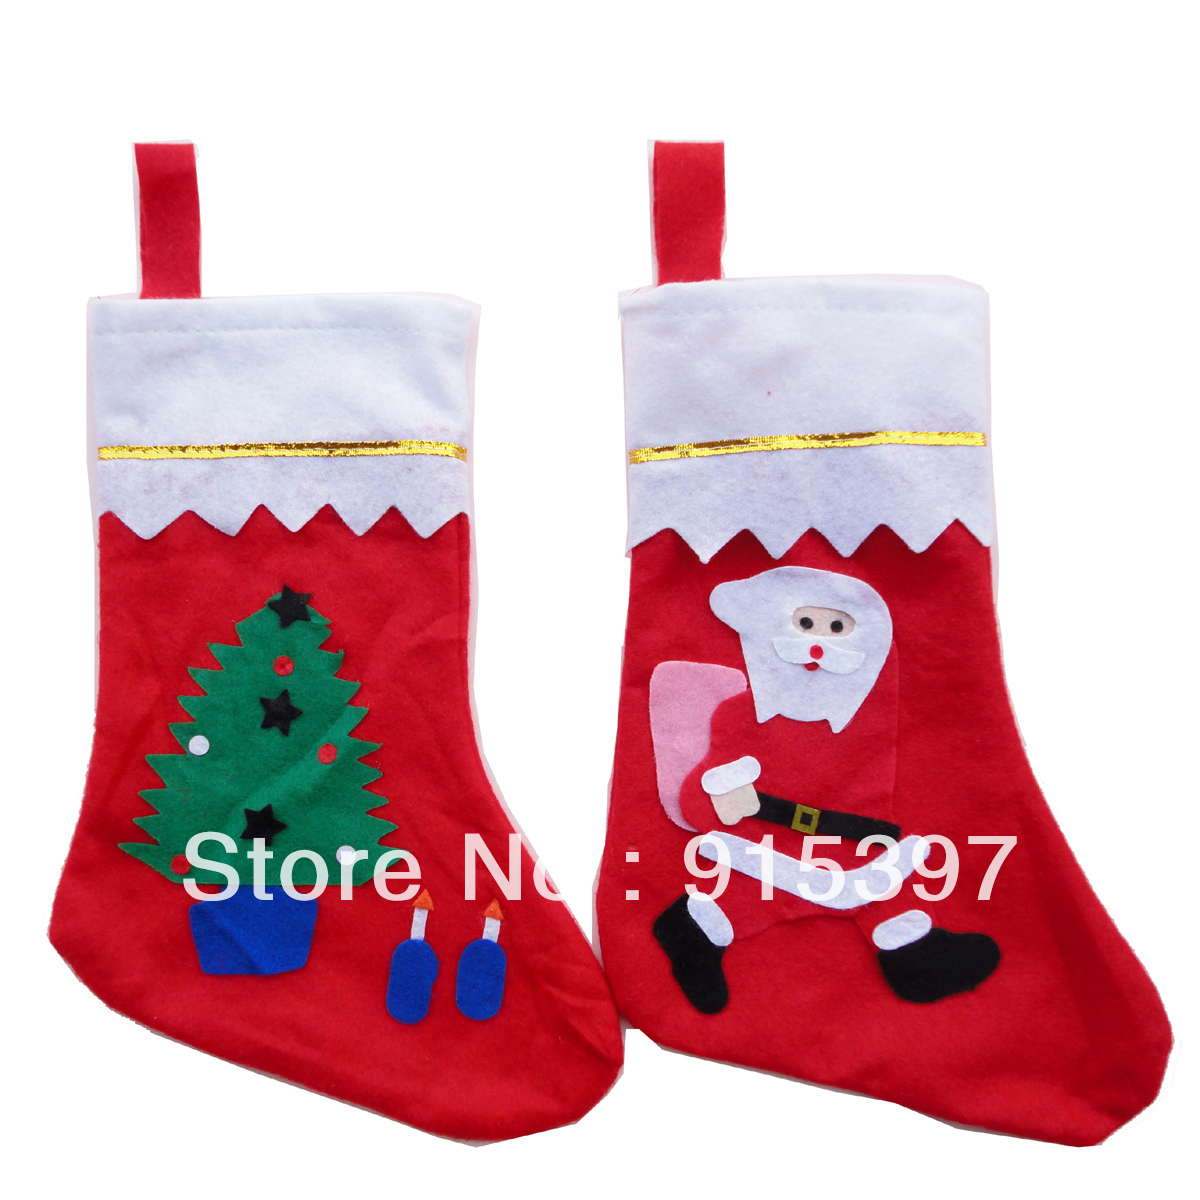 Office Christmas Party Decorations Promotion-Online Shopping for 